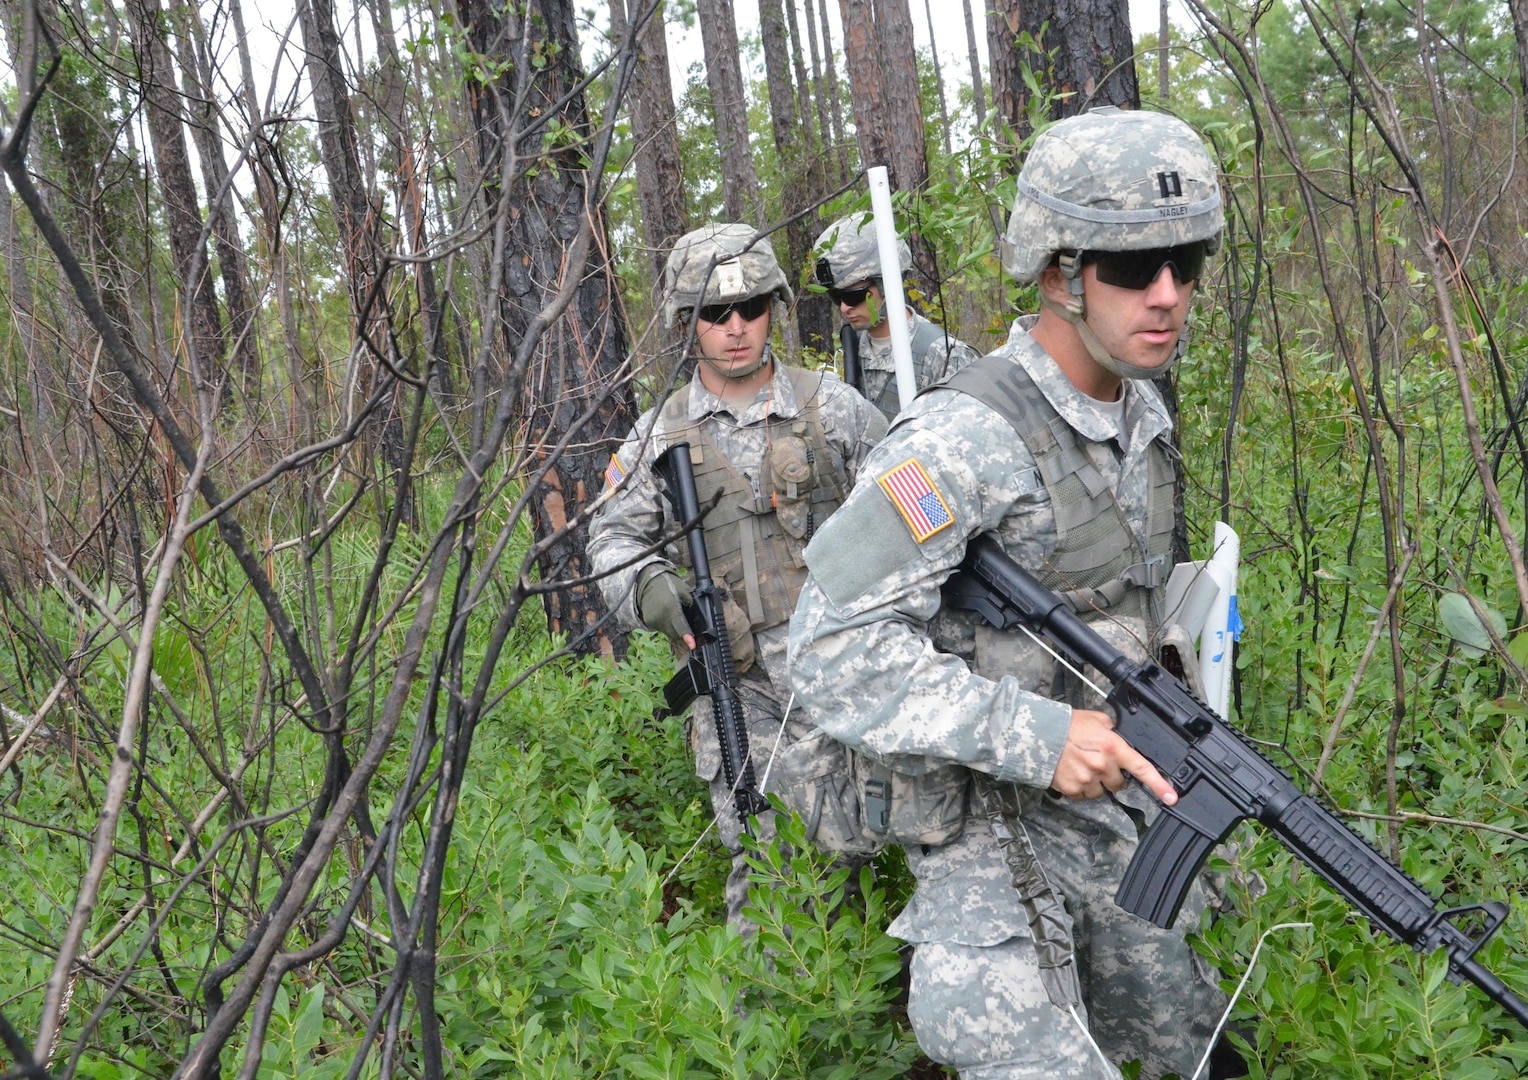 Capt. Raymond Nagley, right, of the Florida Army National Guard's 254th Transportation Battalion, takes part in a recon mission as part of a field training exercise during the Pathfinder Course at Camp Blanding Joint Training Center, Fla., Sept. 24, 2014. 